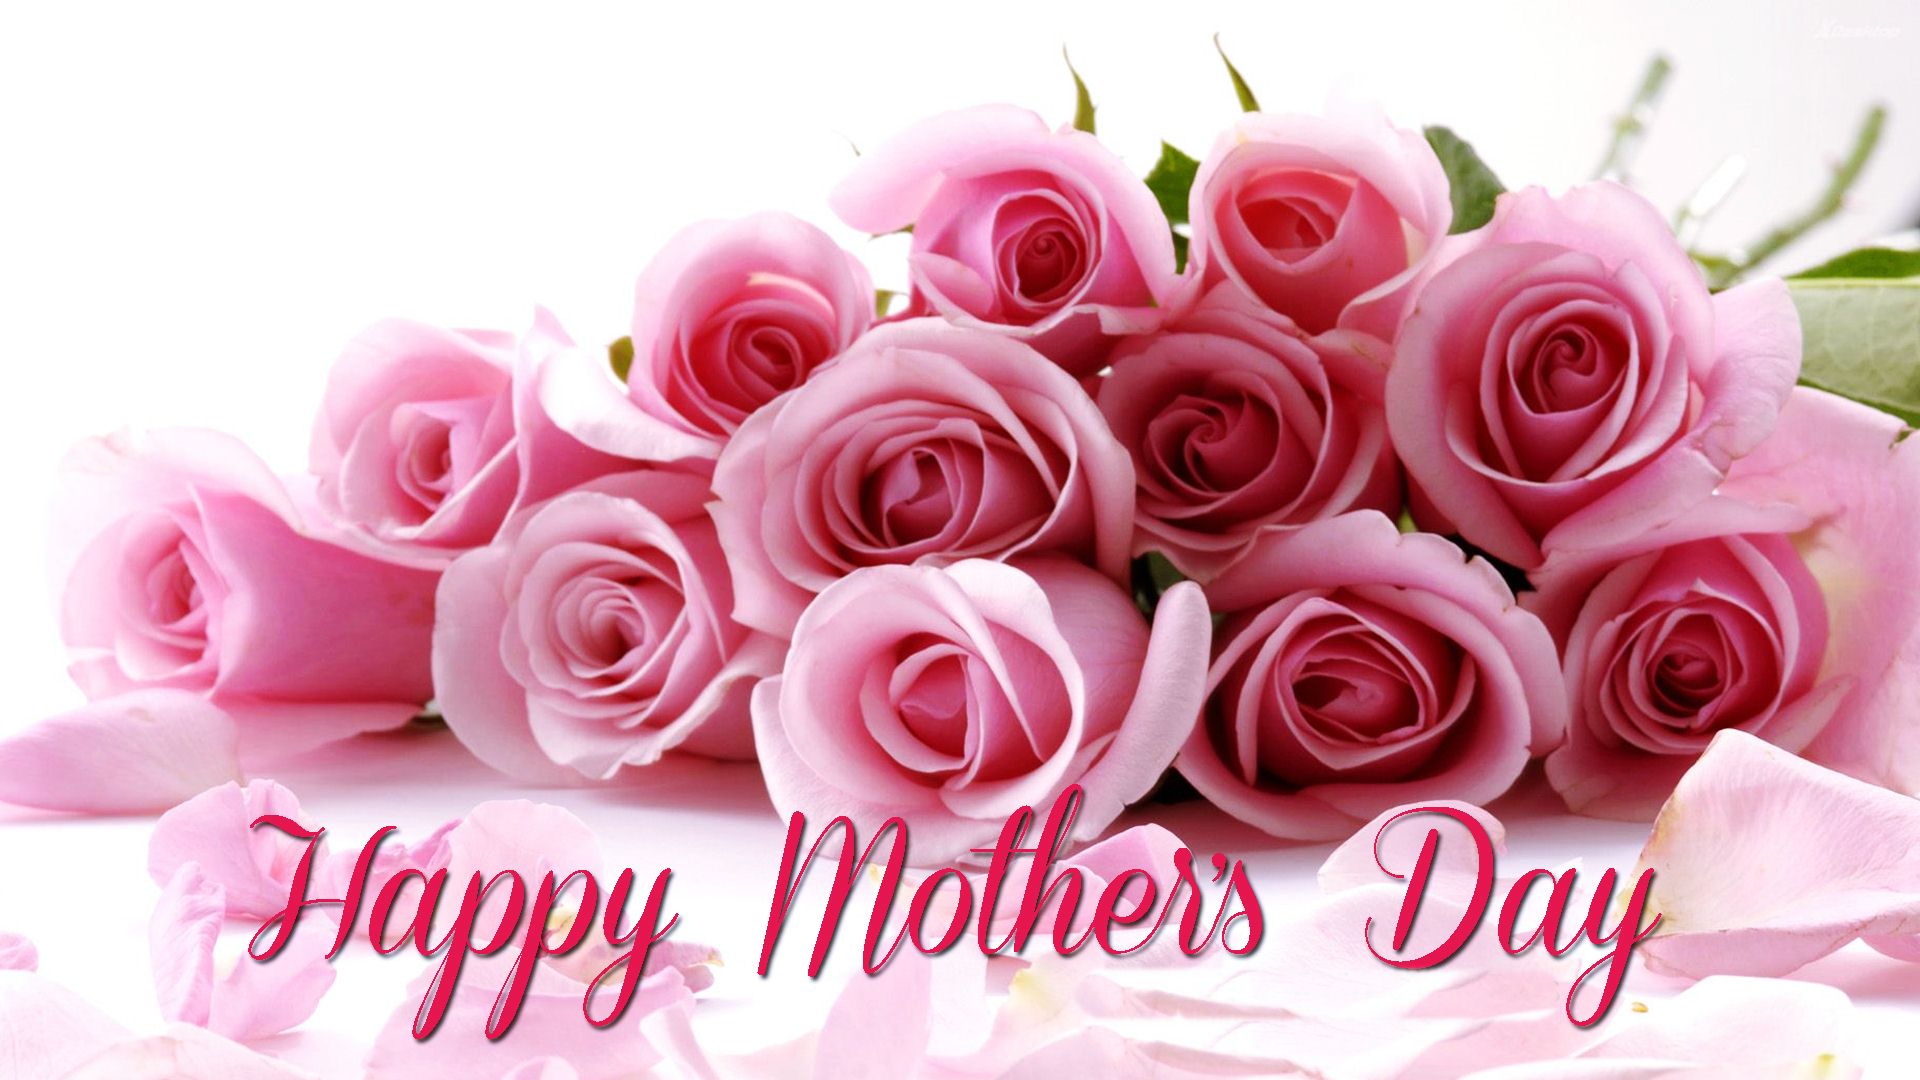 Mothers Day Images Free Download | Wallpapers, Backgrounds, Images ...